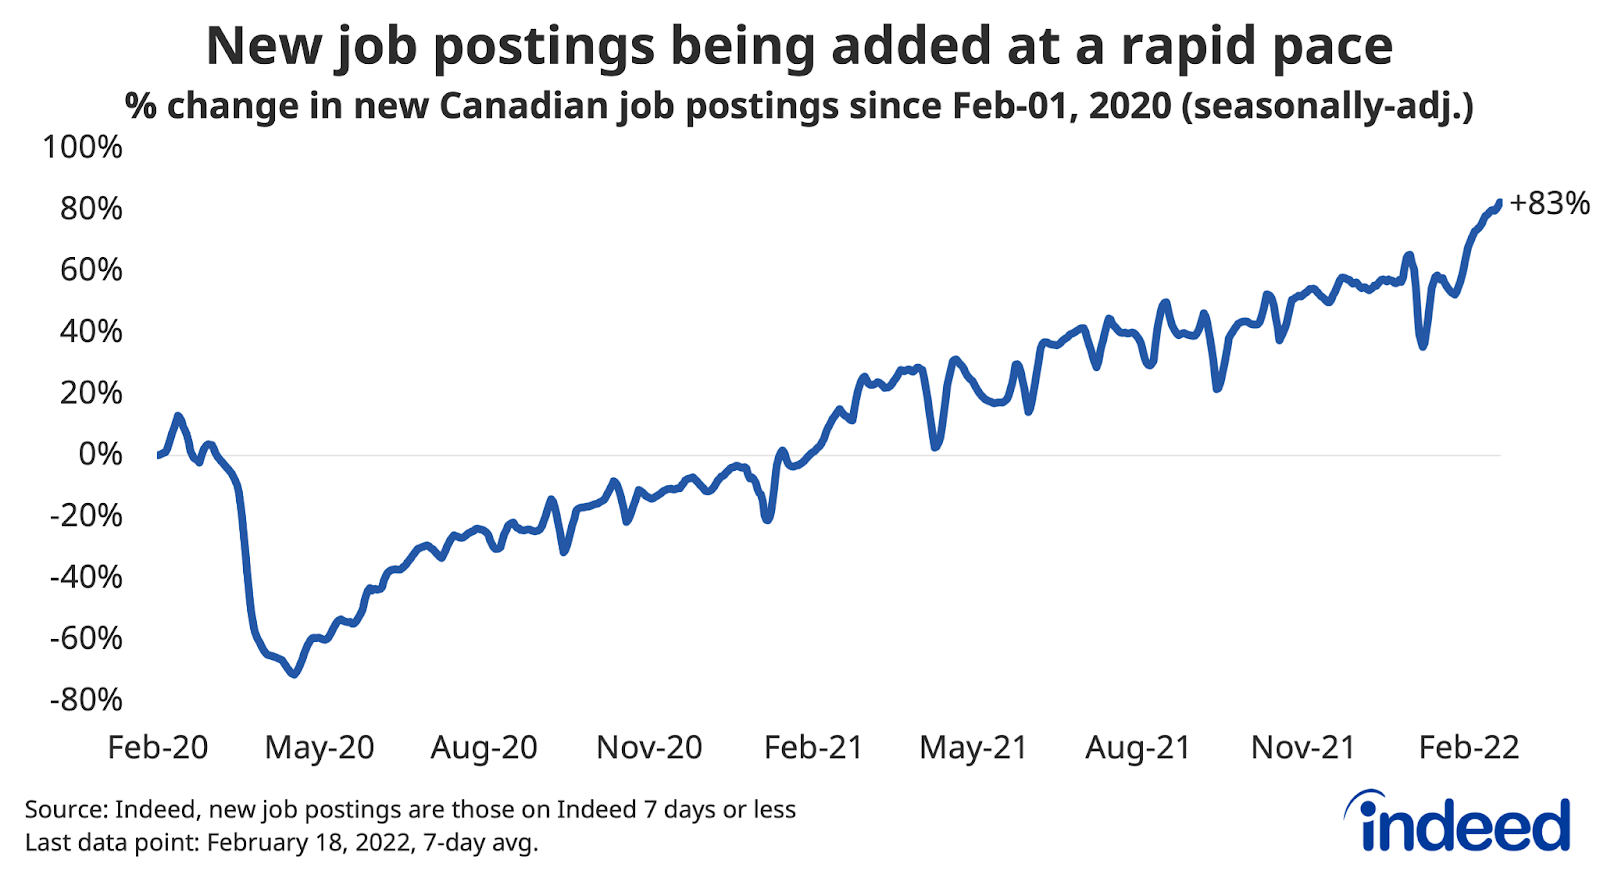 Line graph titled “New job postings being added at a rapid pace.”